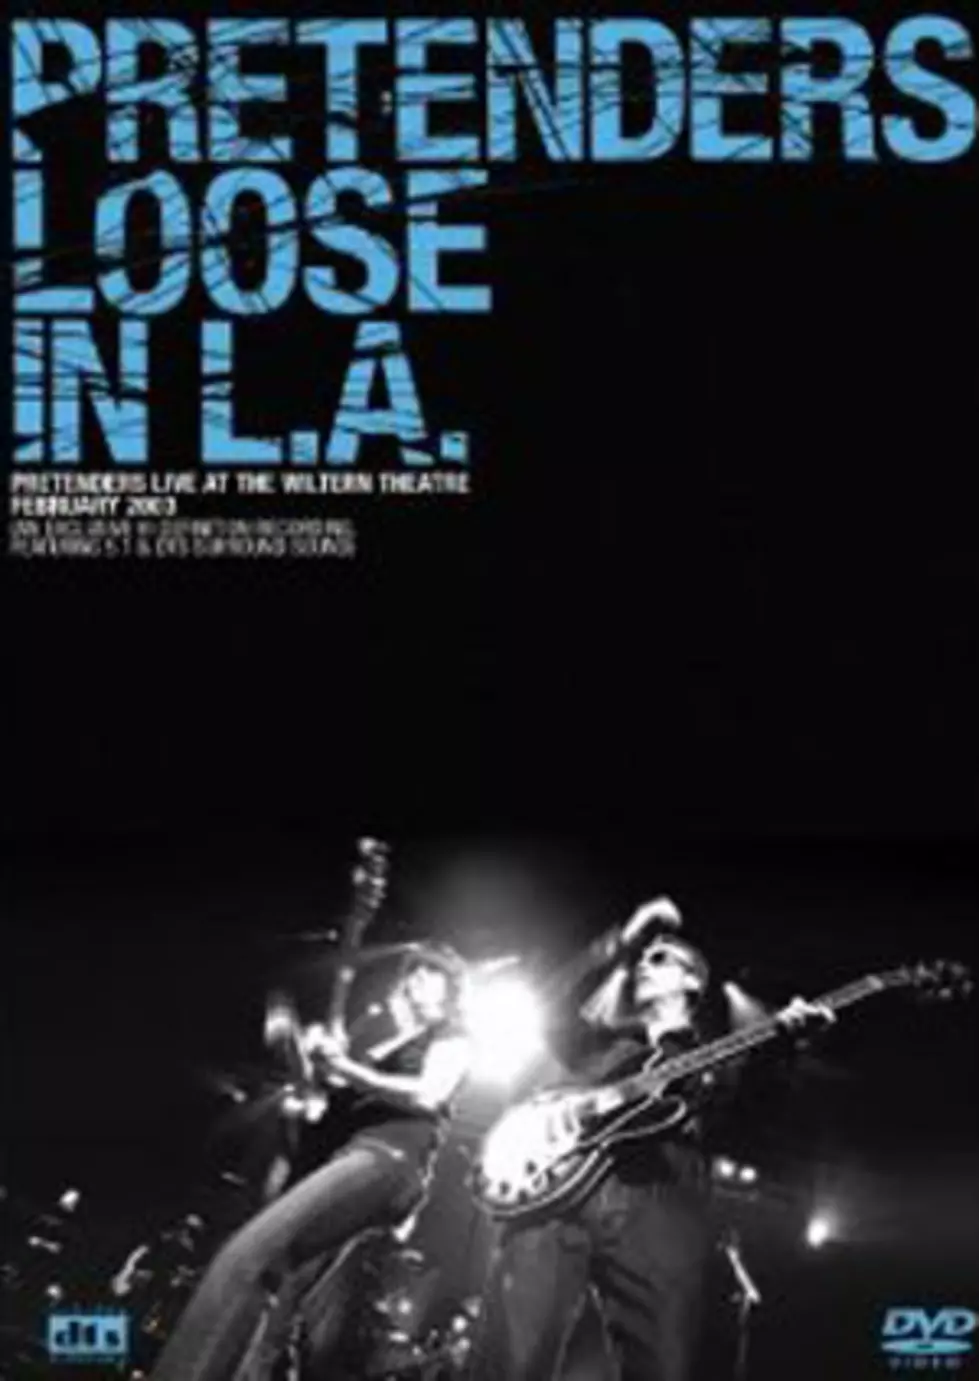 The Pretenders, &#8216;Loose in L.A.&#8217; &#8211; Blu-ray Review